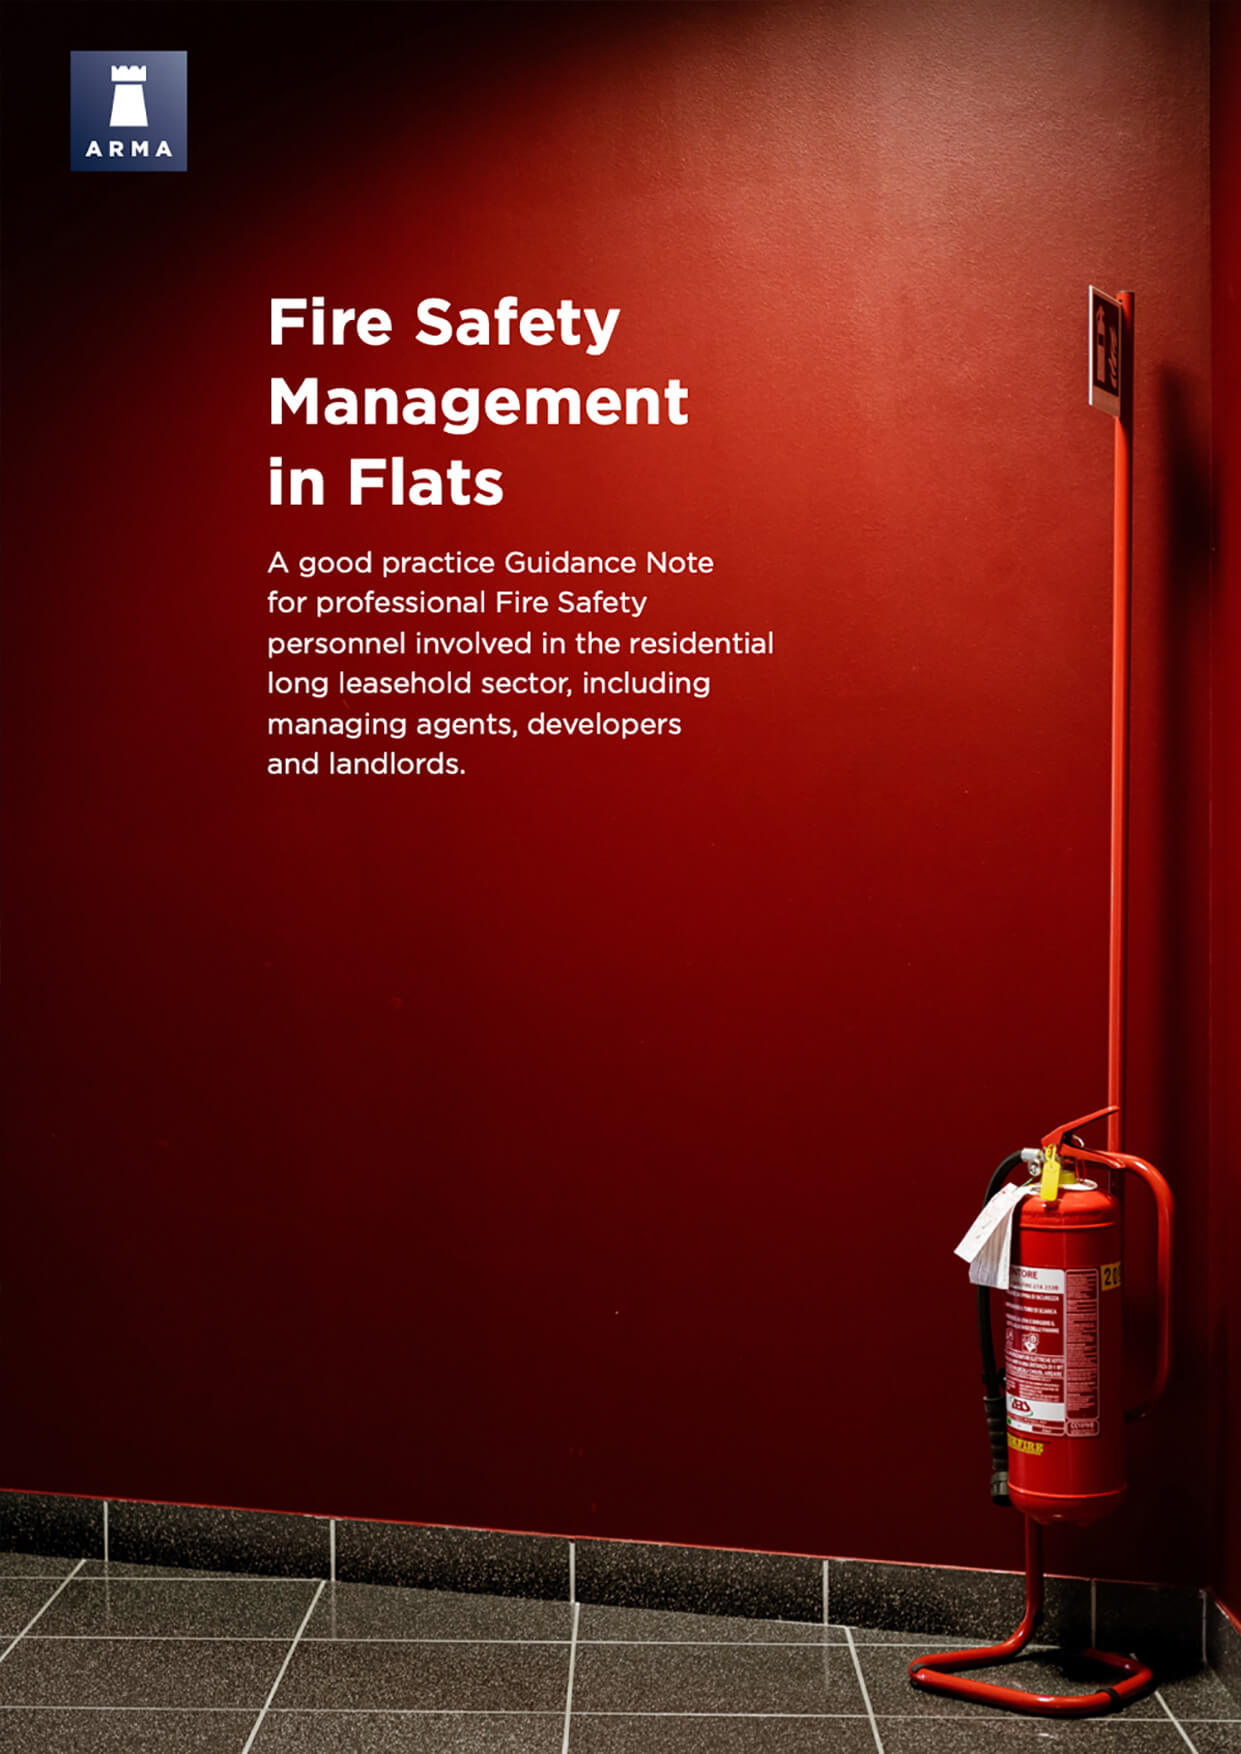 ARMA Fire Safety Guidance